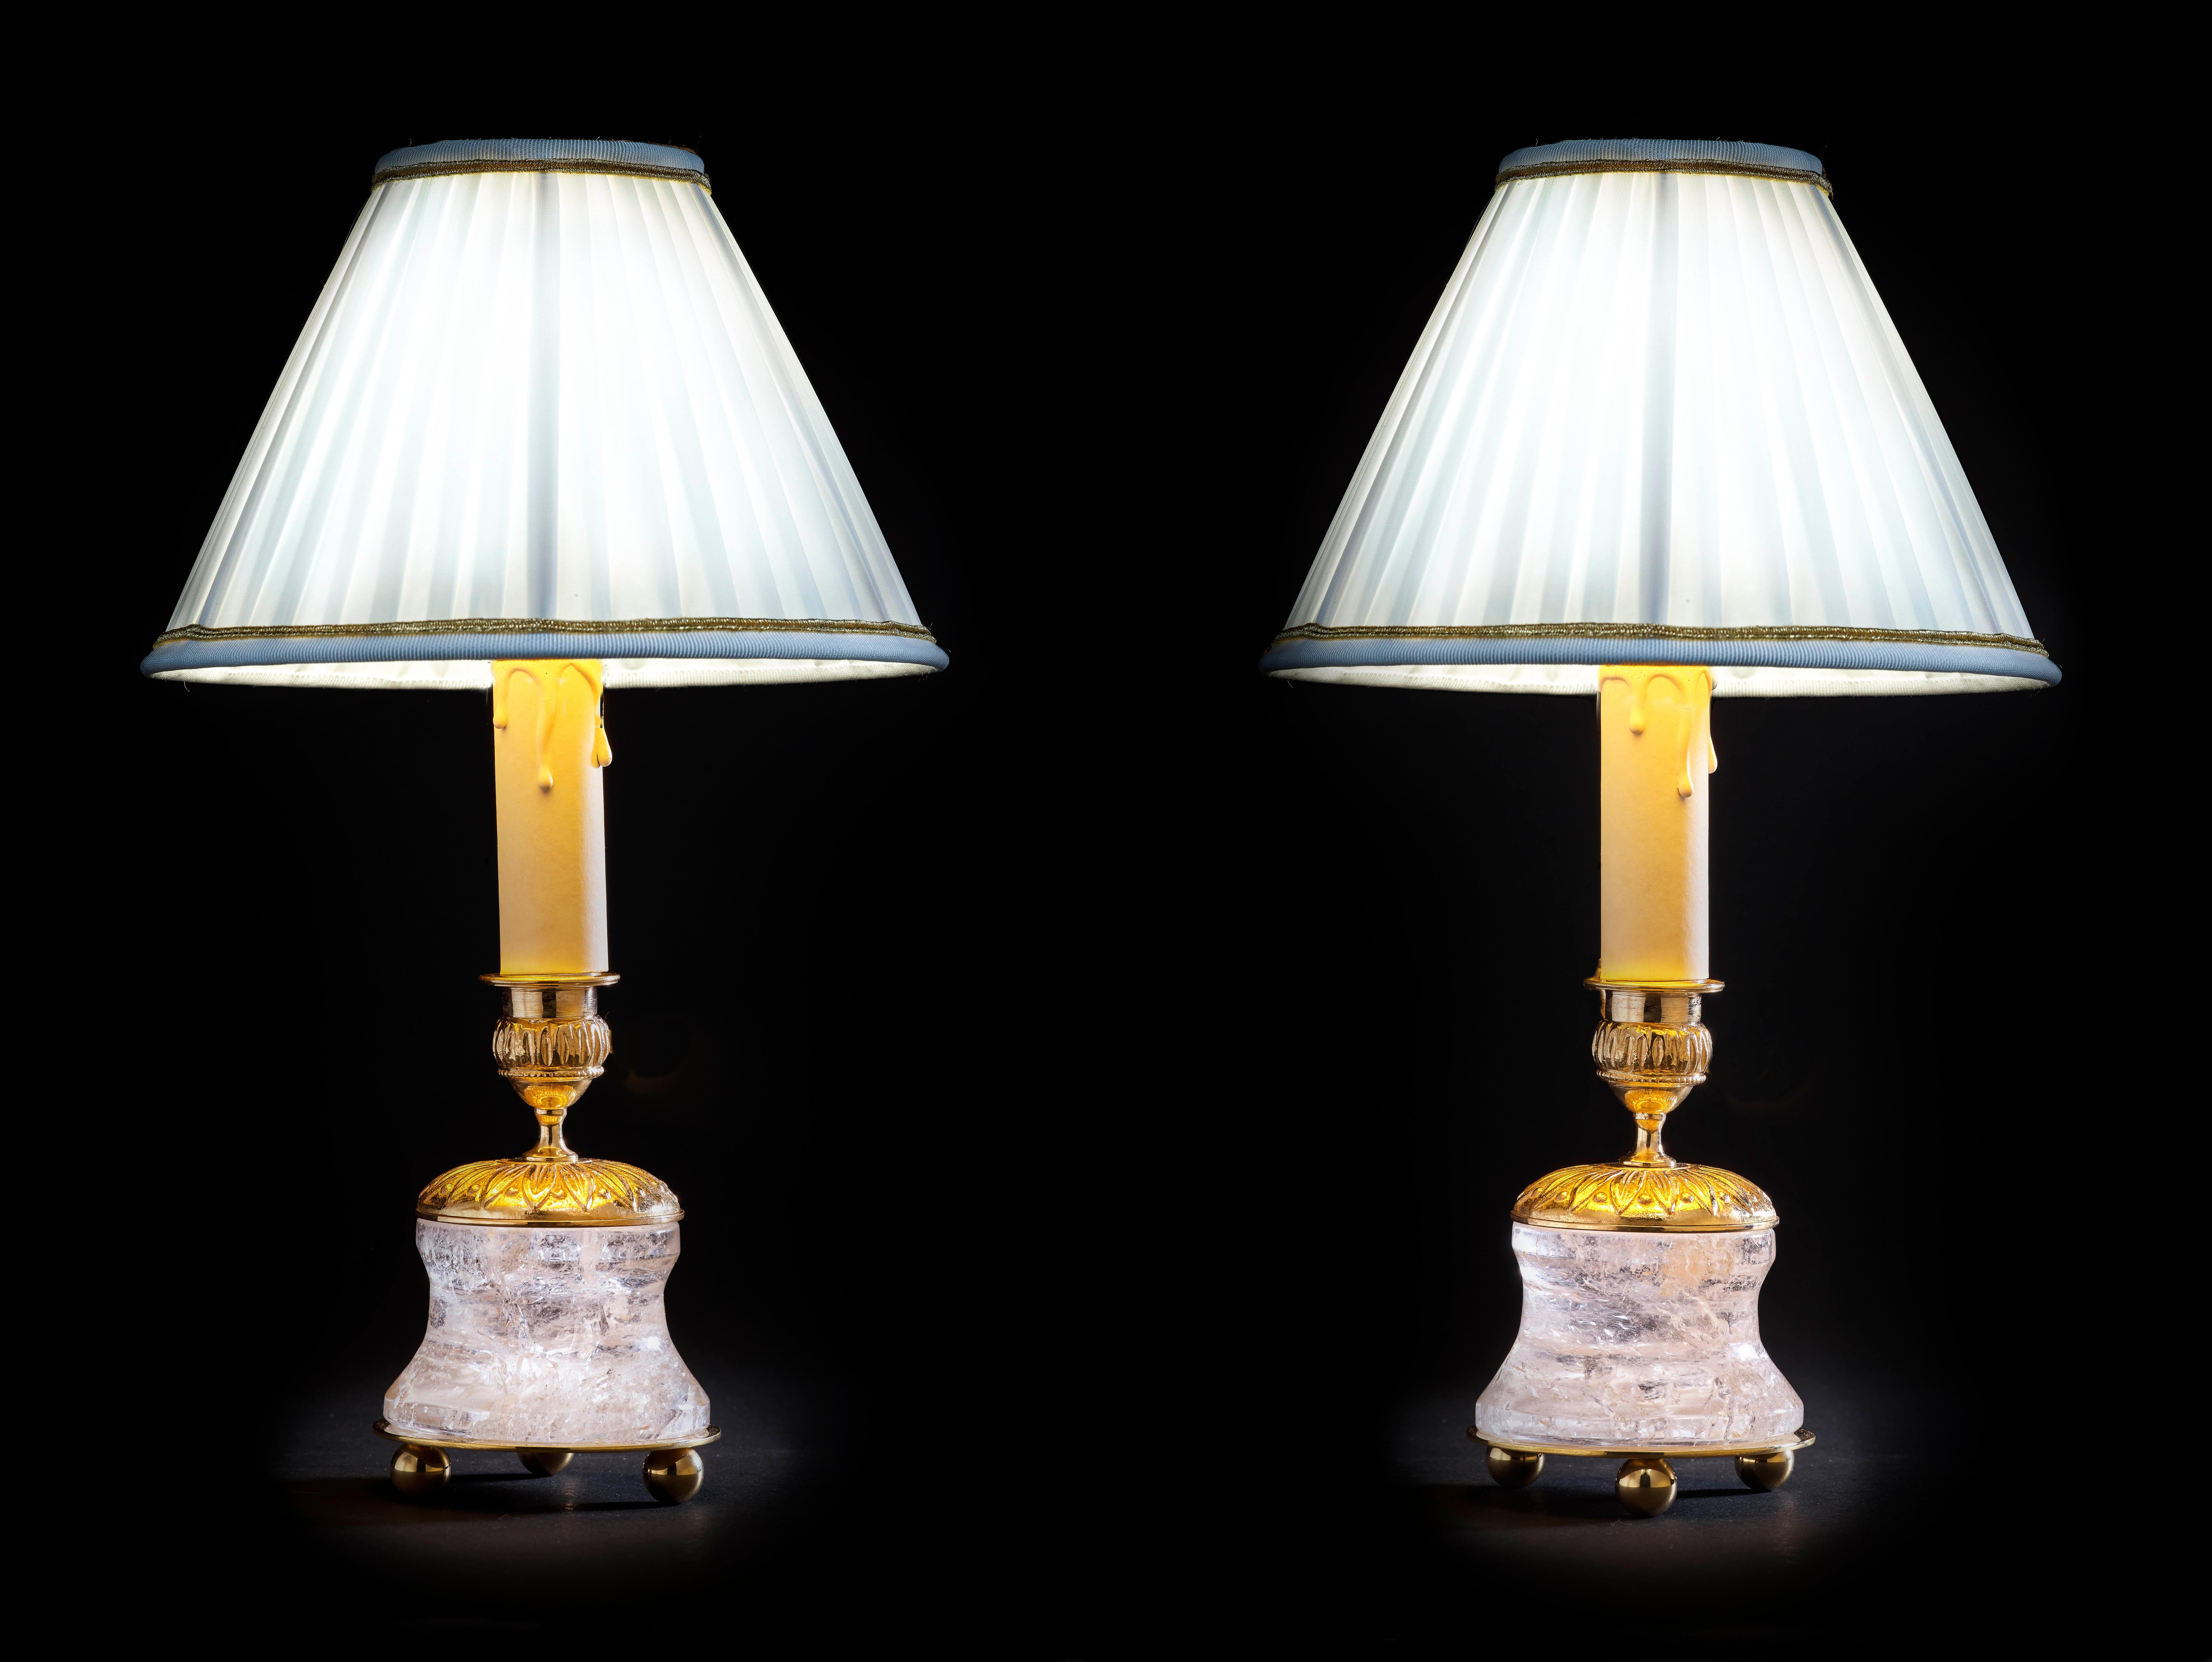 Rock crystal French First Empire style 24-karat ormolu gilding bronze white lampshades made by Alexandre Vossion.
This model can be also used as candlesticks to make your dining table so chic.
Model IV of four different models.
Handmade in